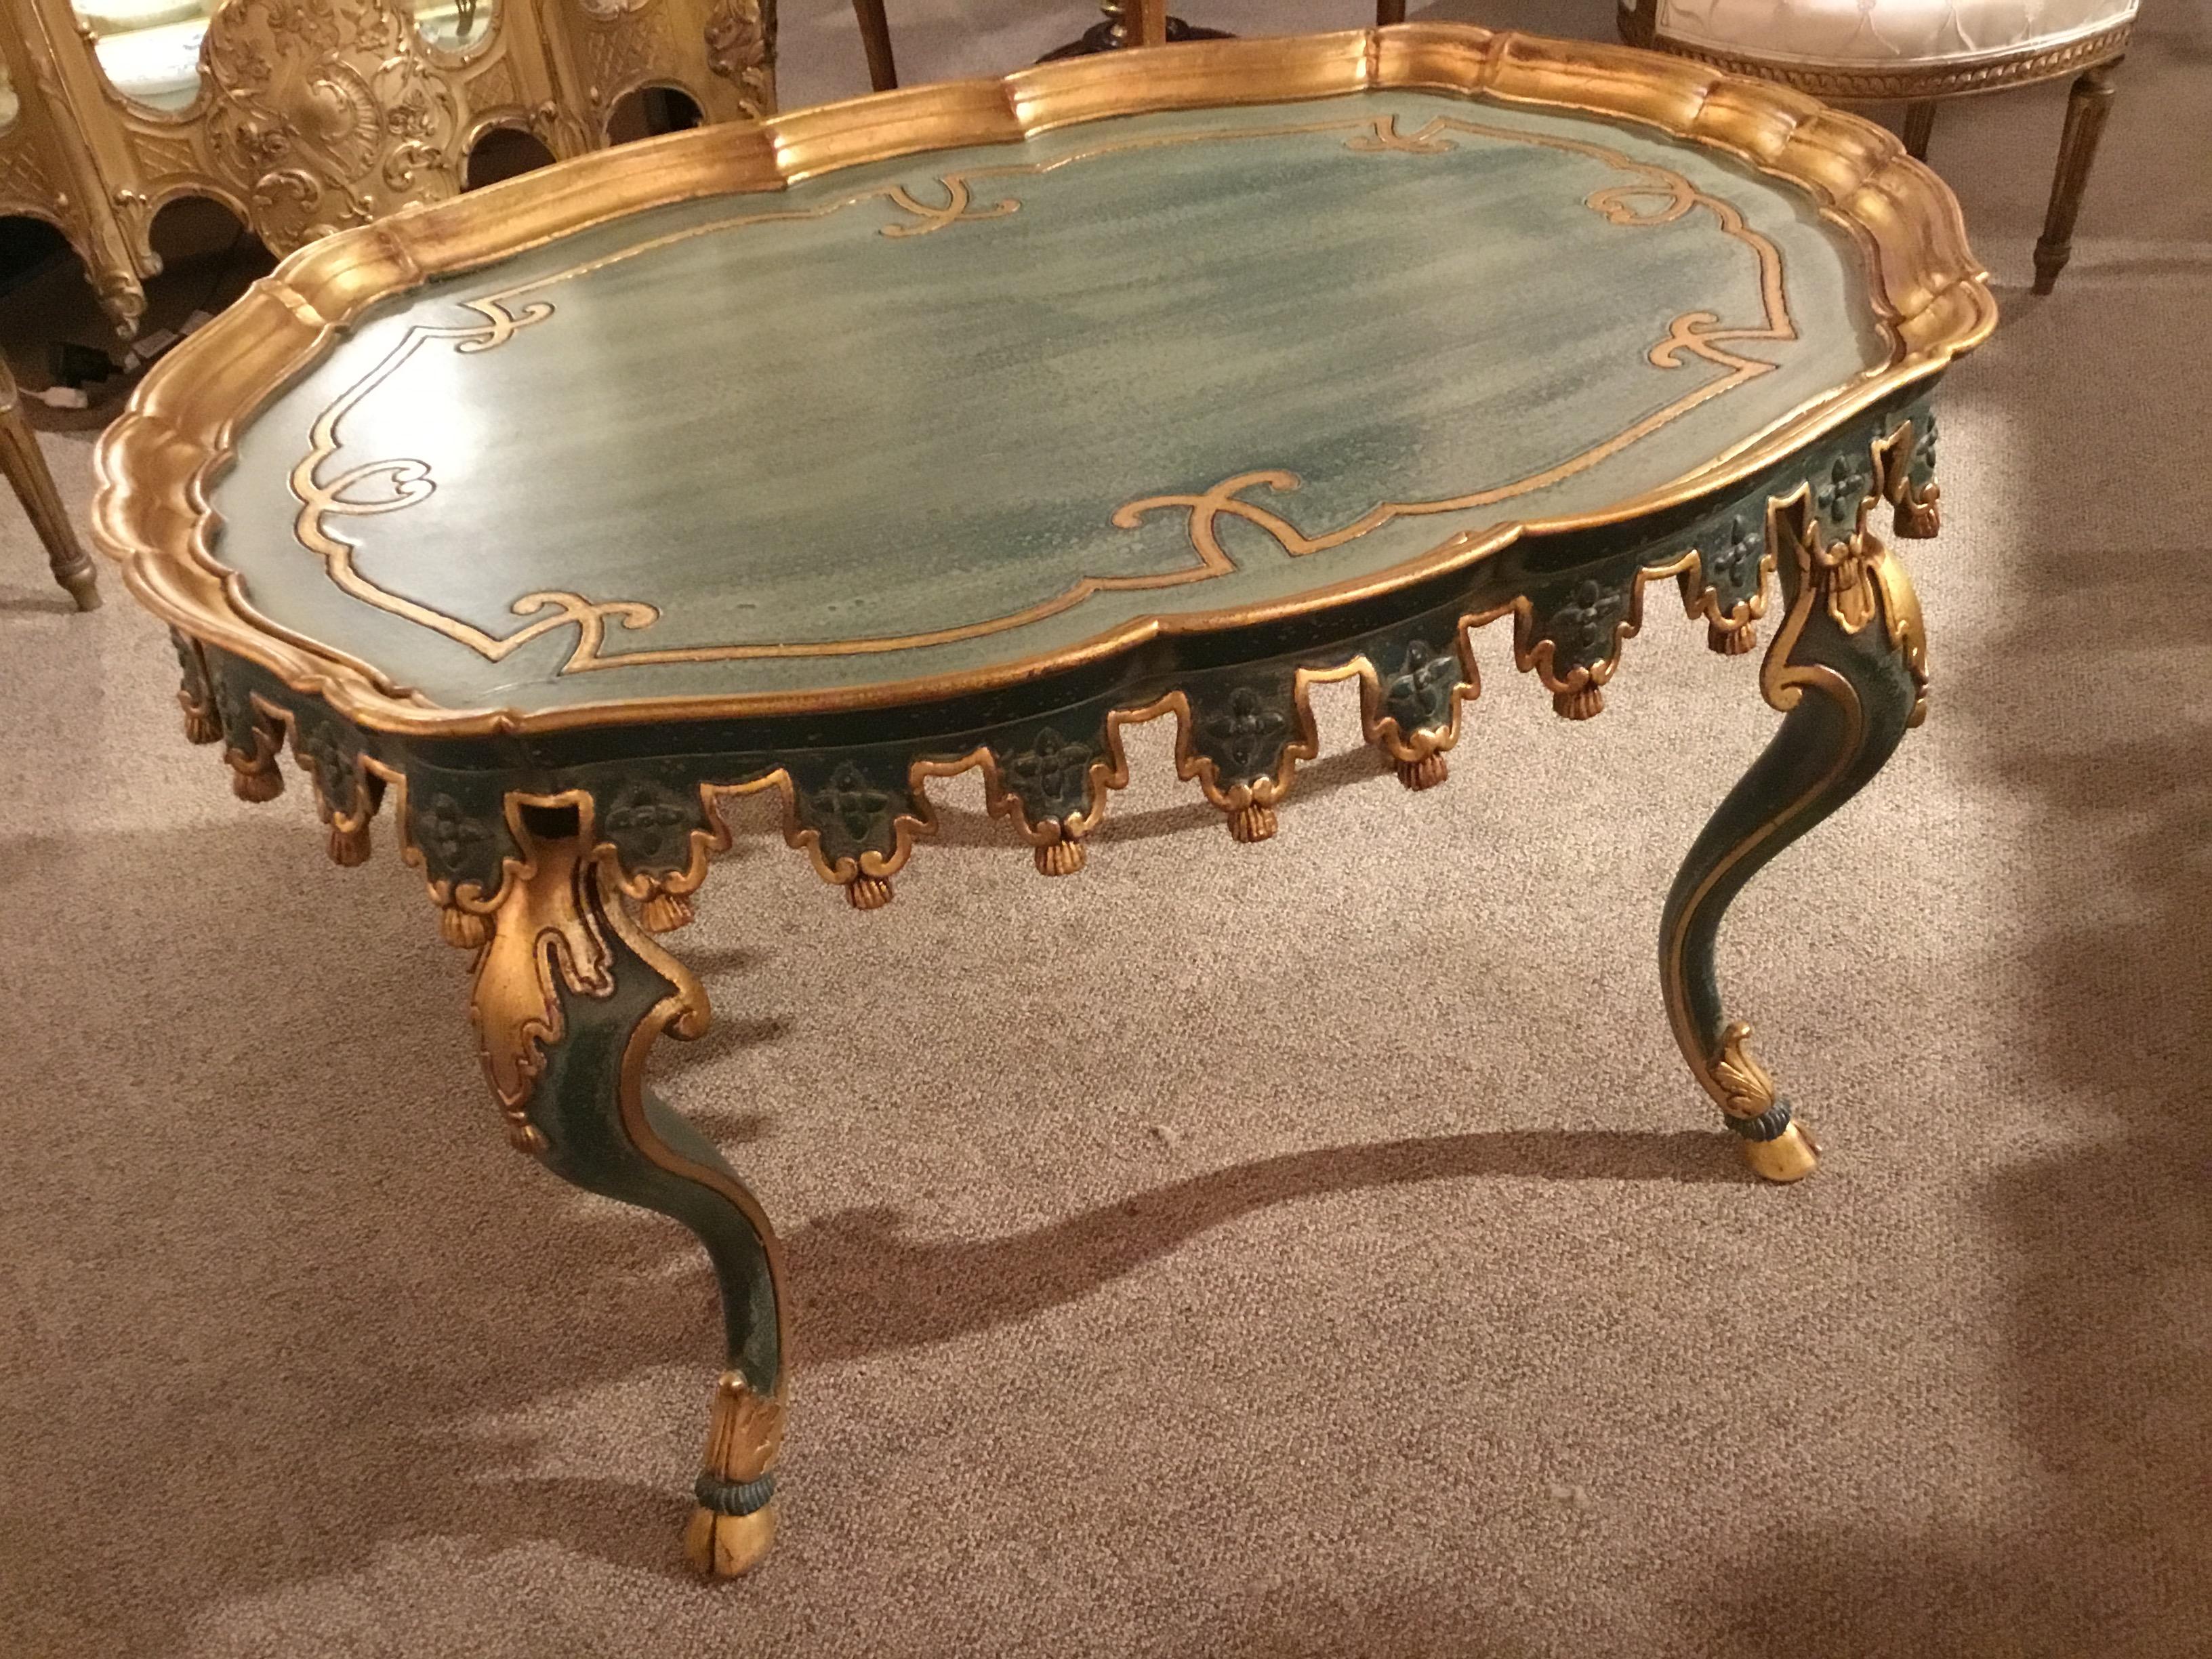 Hardwood Coffee or Cocktail Table, Italian, Oval Painted with Gold Gilt Trim